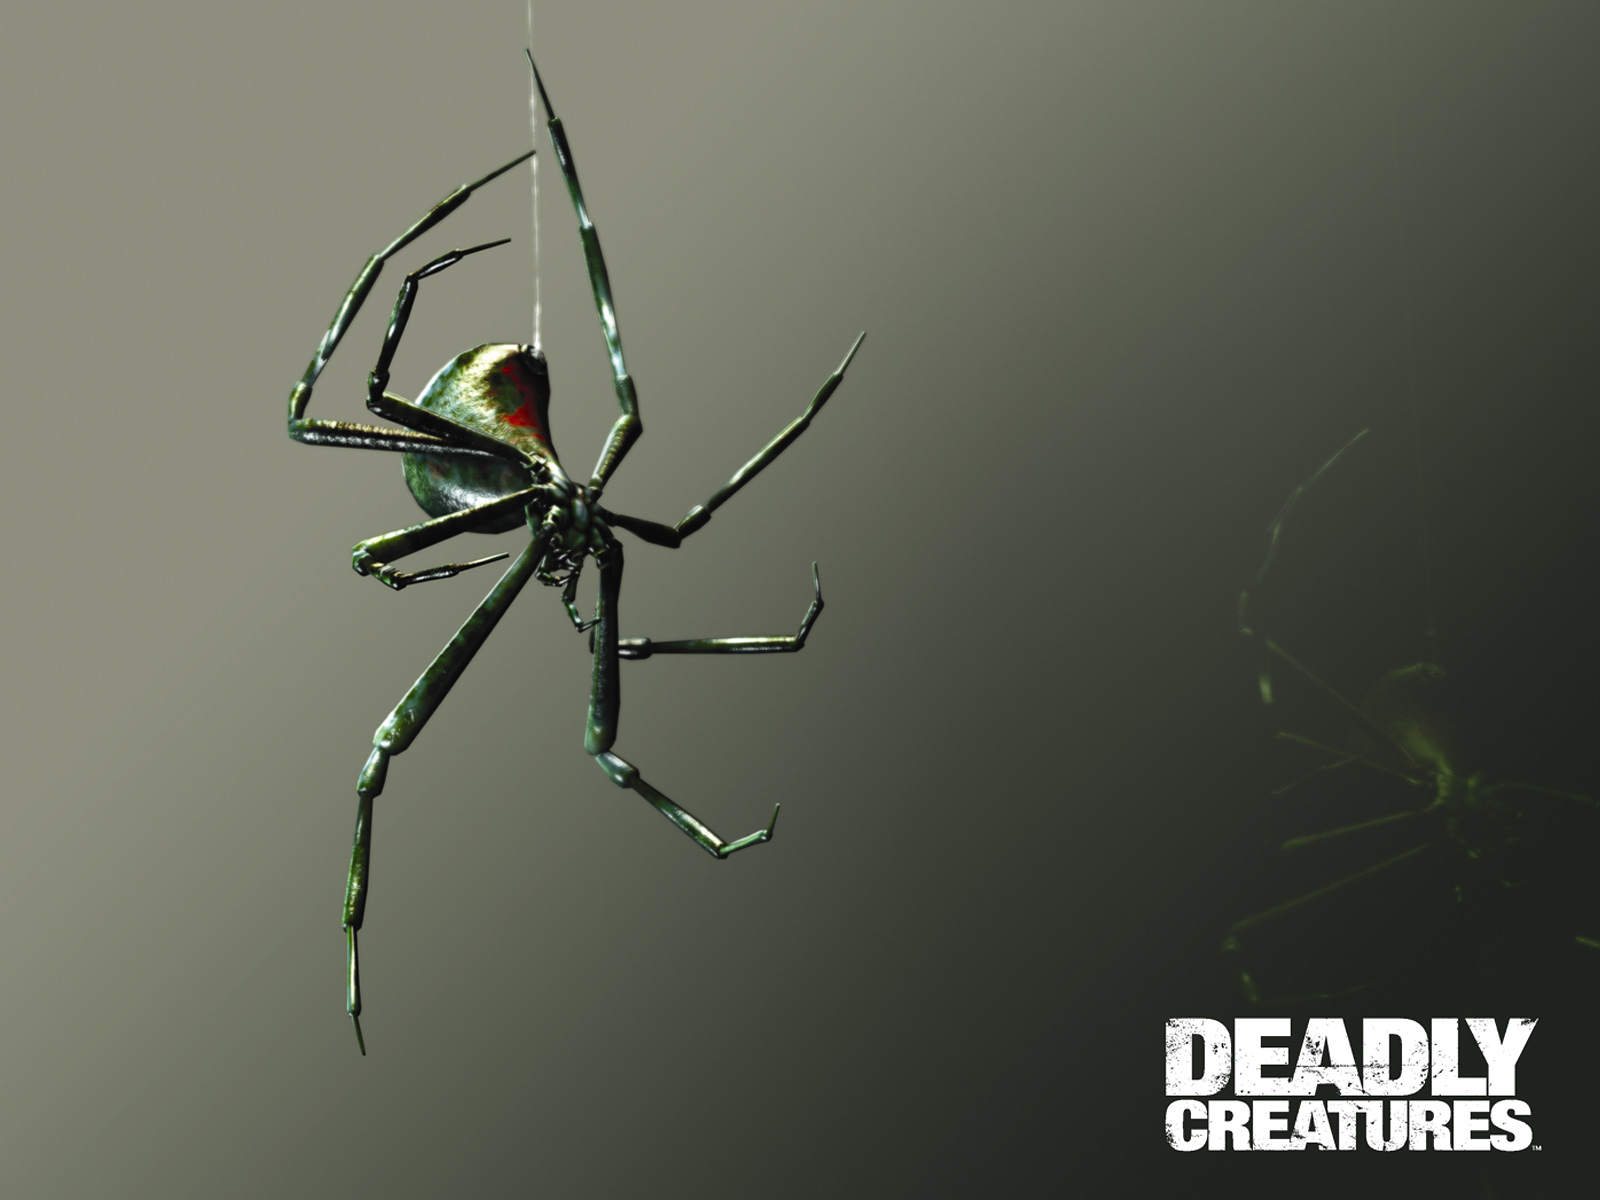 Deadly Creatures Wallpapers at Wallpaperist